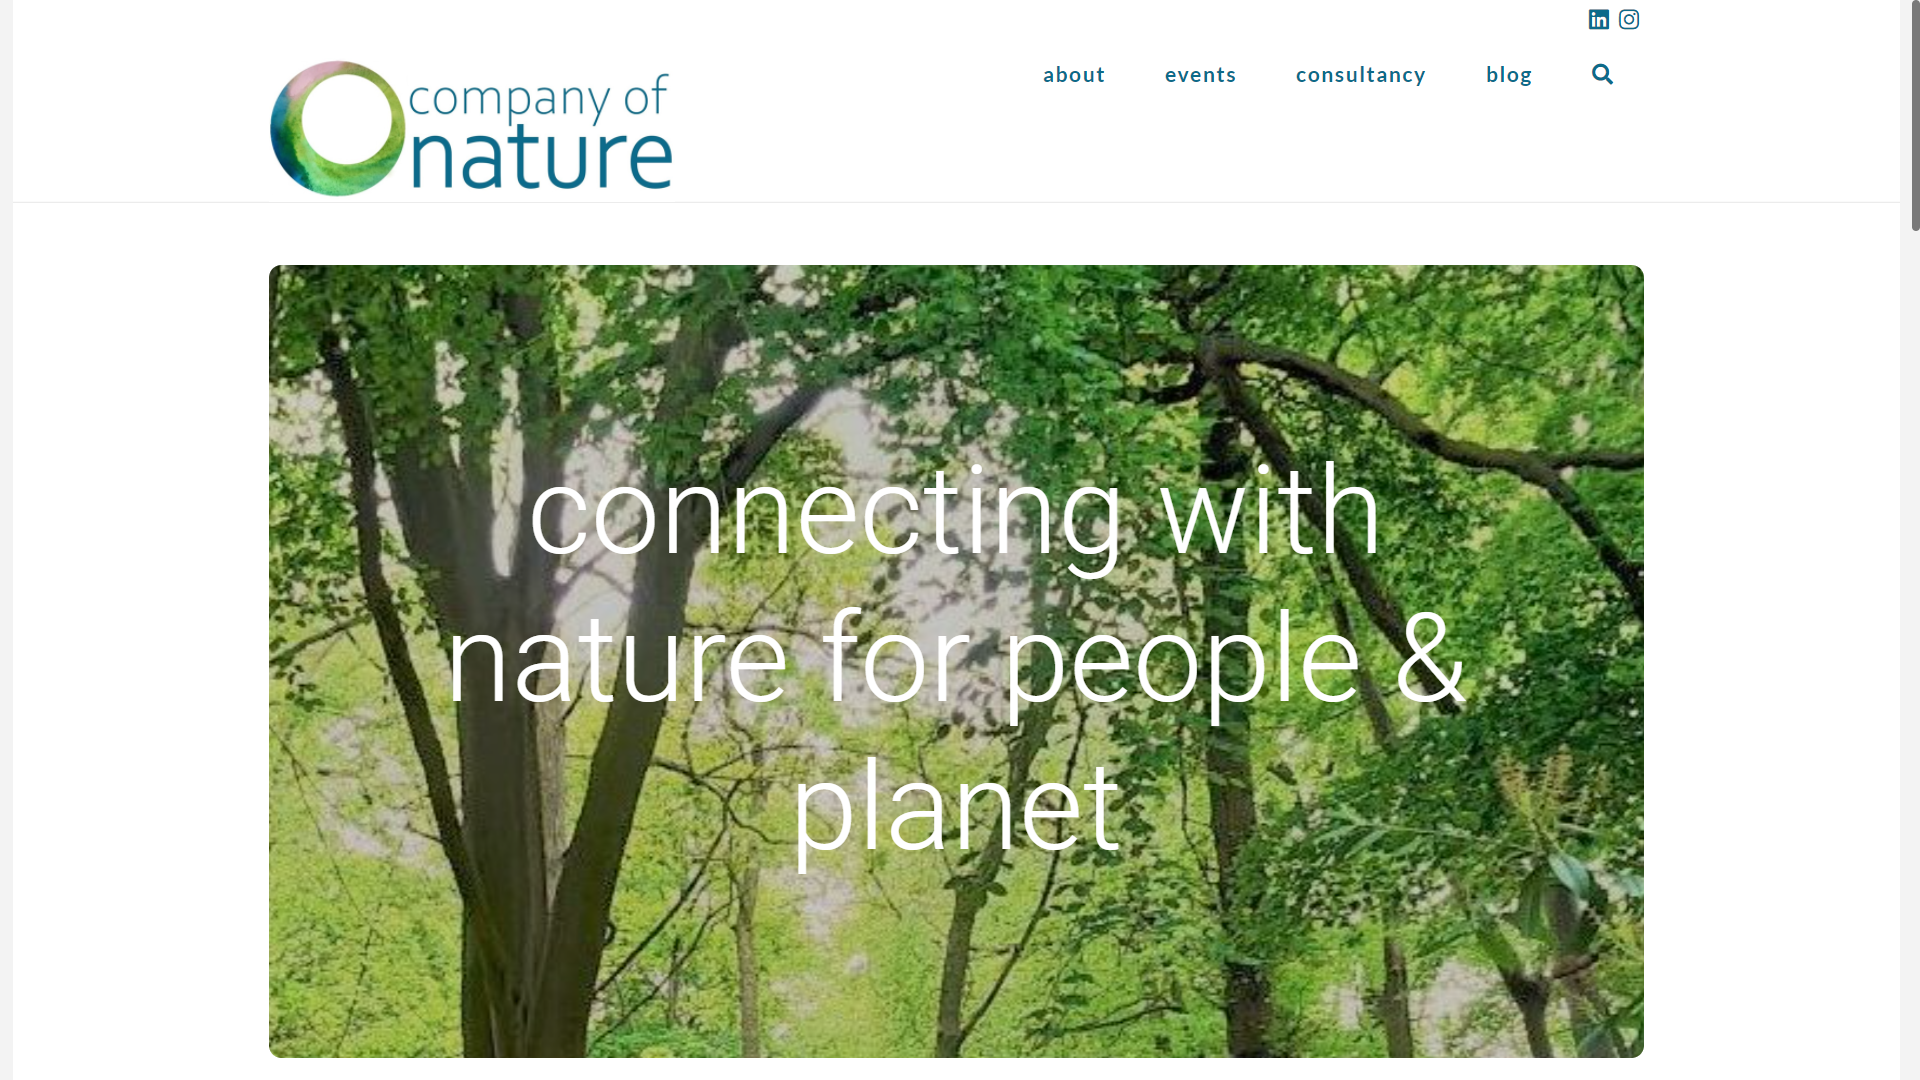 Featured image for “Company of Nature”